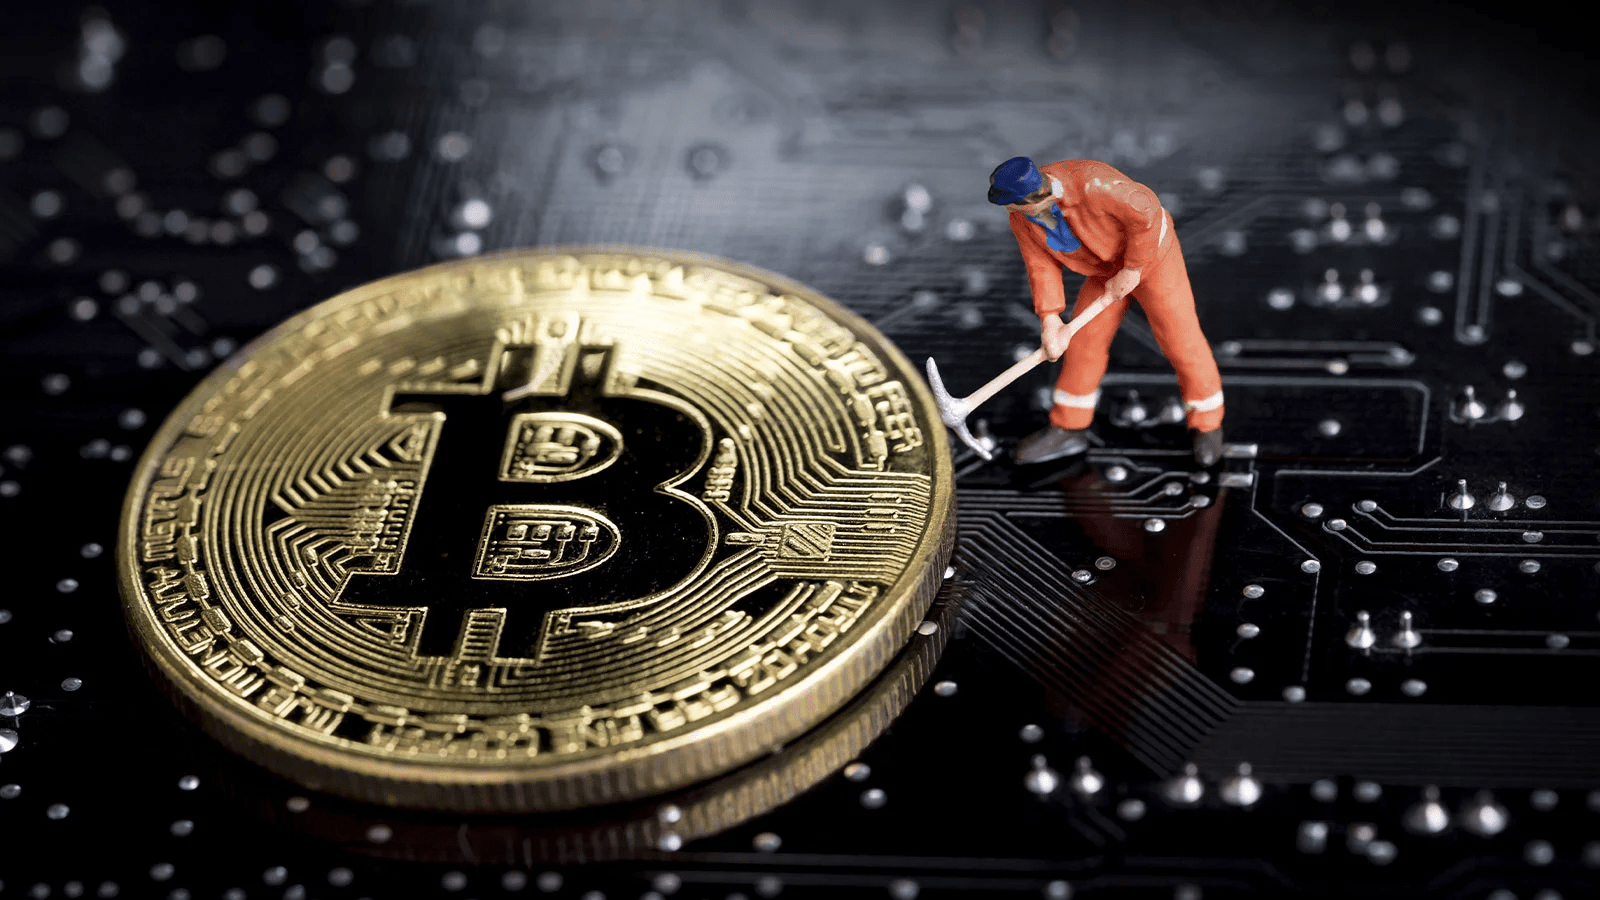 Bitcoin Miners Break Records, Sending $128 Million to Exchanges Amidst Mounting Challenges